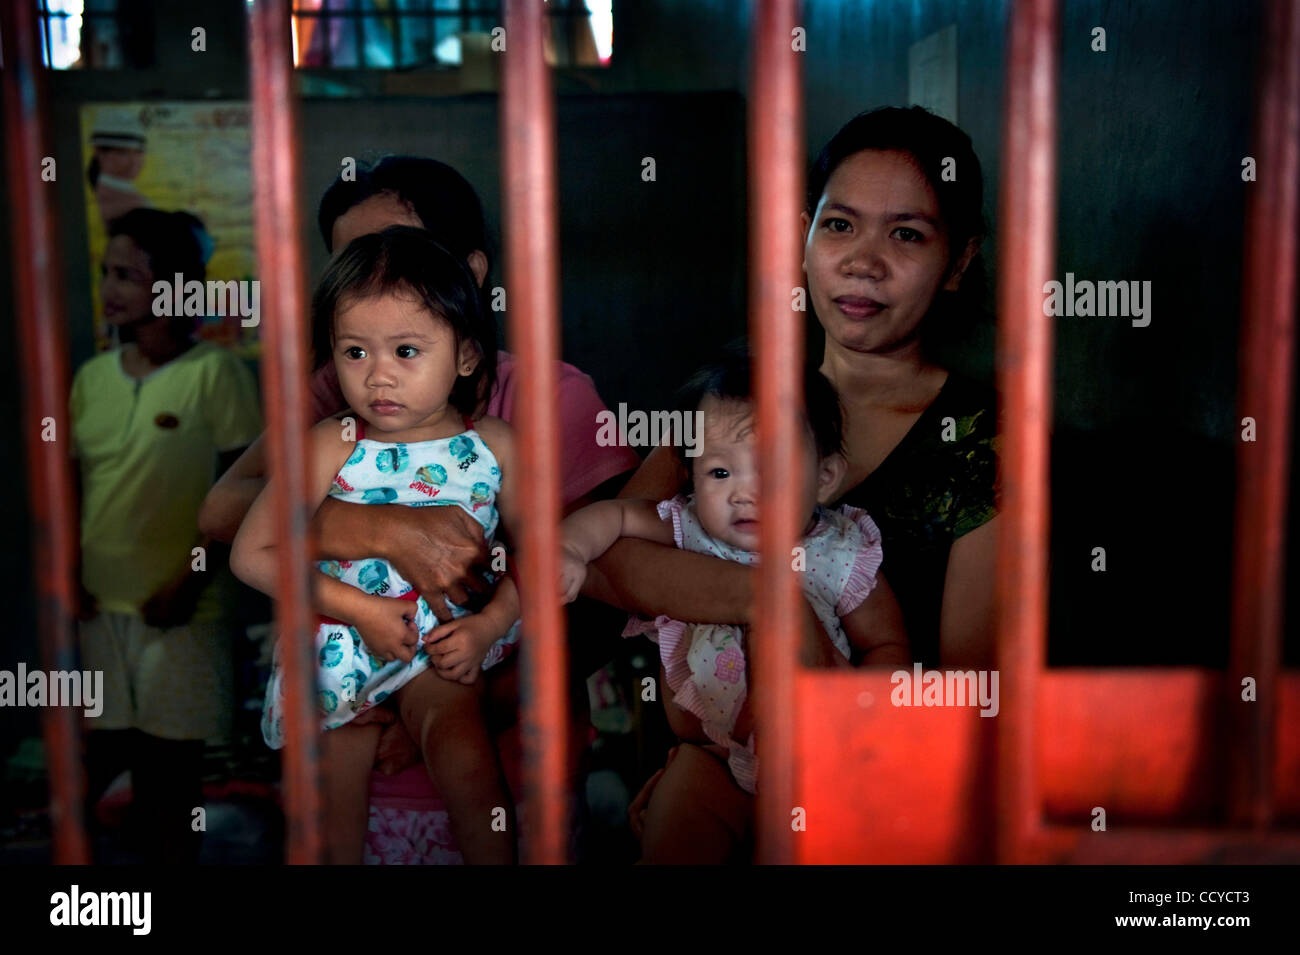 May 07, 2010 - Cotabato City, Mindanao, Philippines - 07 May 2010 Cotabato city, Mindanao Philippines..Female inmates hold ther children inside the cell during the daily family visit. Children spend whole day in prison with their mothers. Prison houses 130 inmates out of which 8 women while the buil Stock Photo